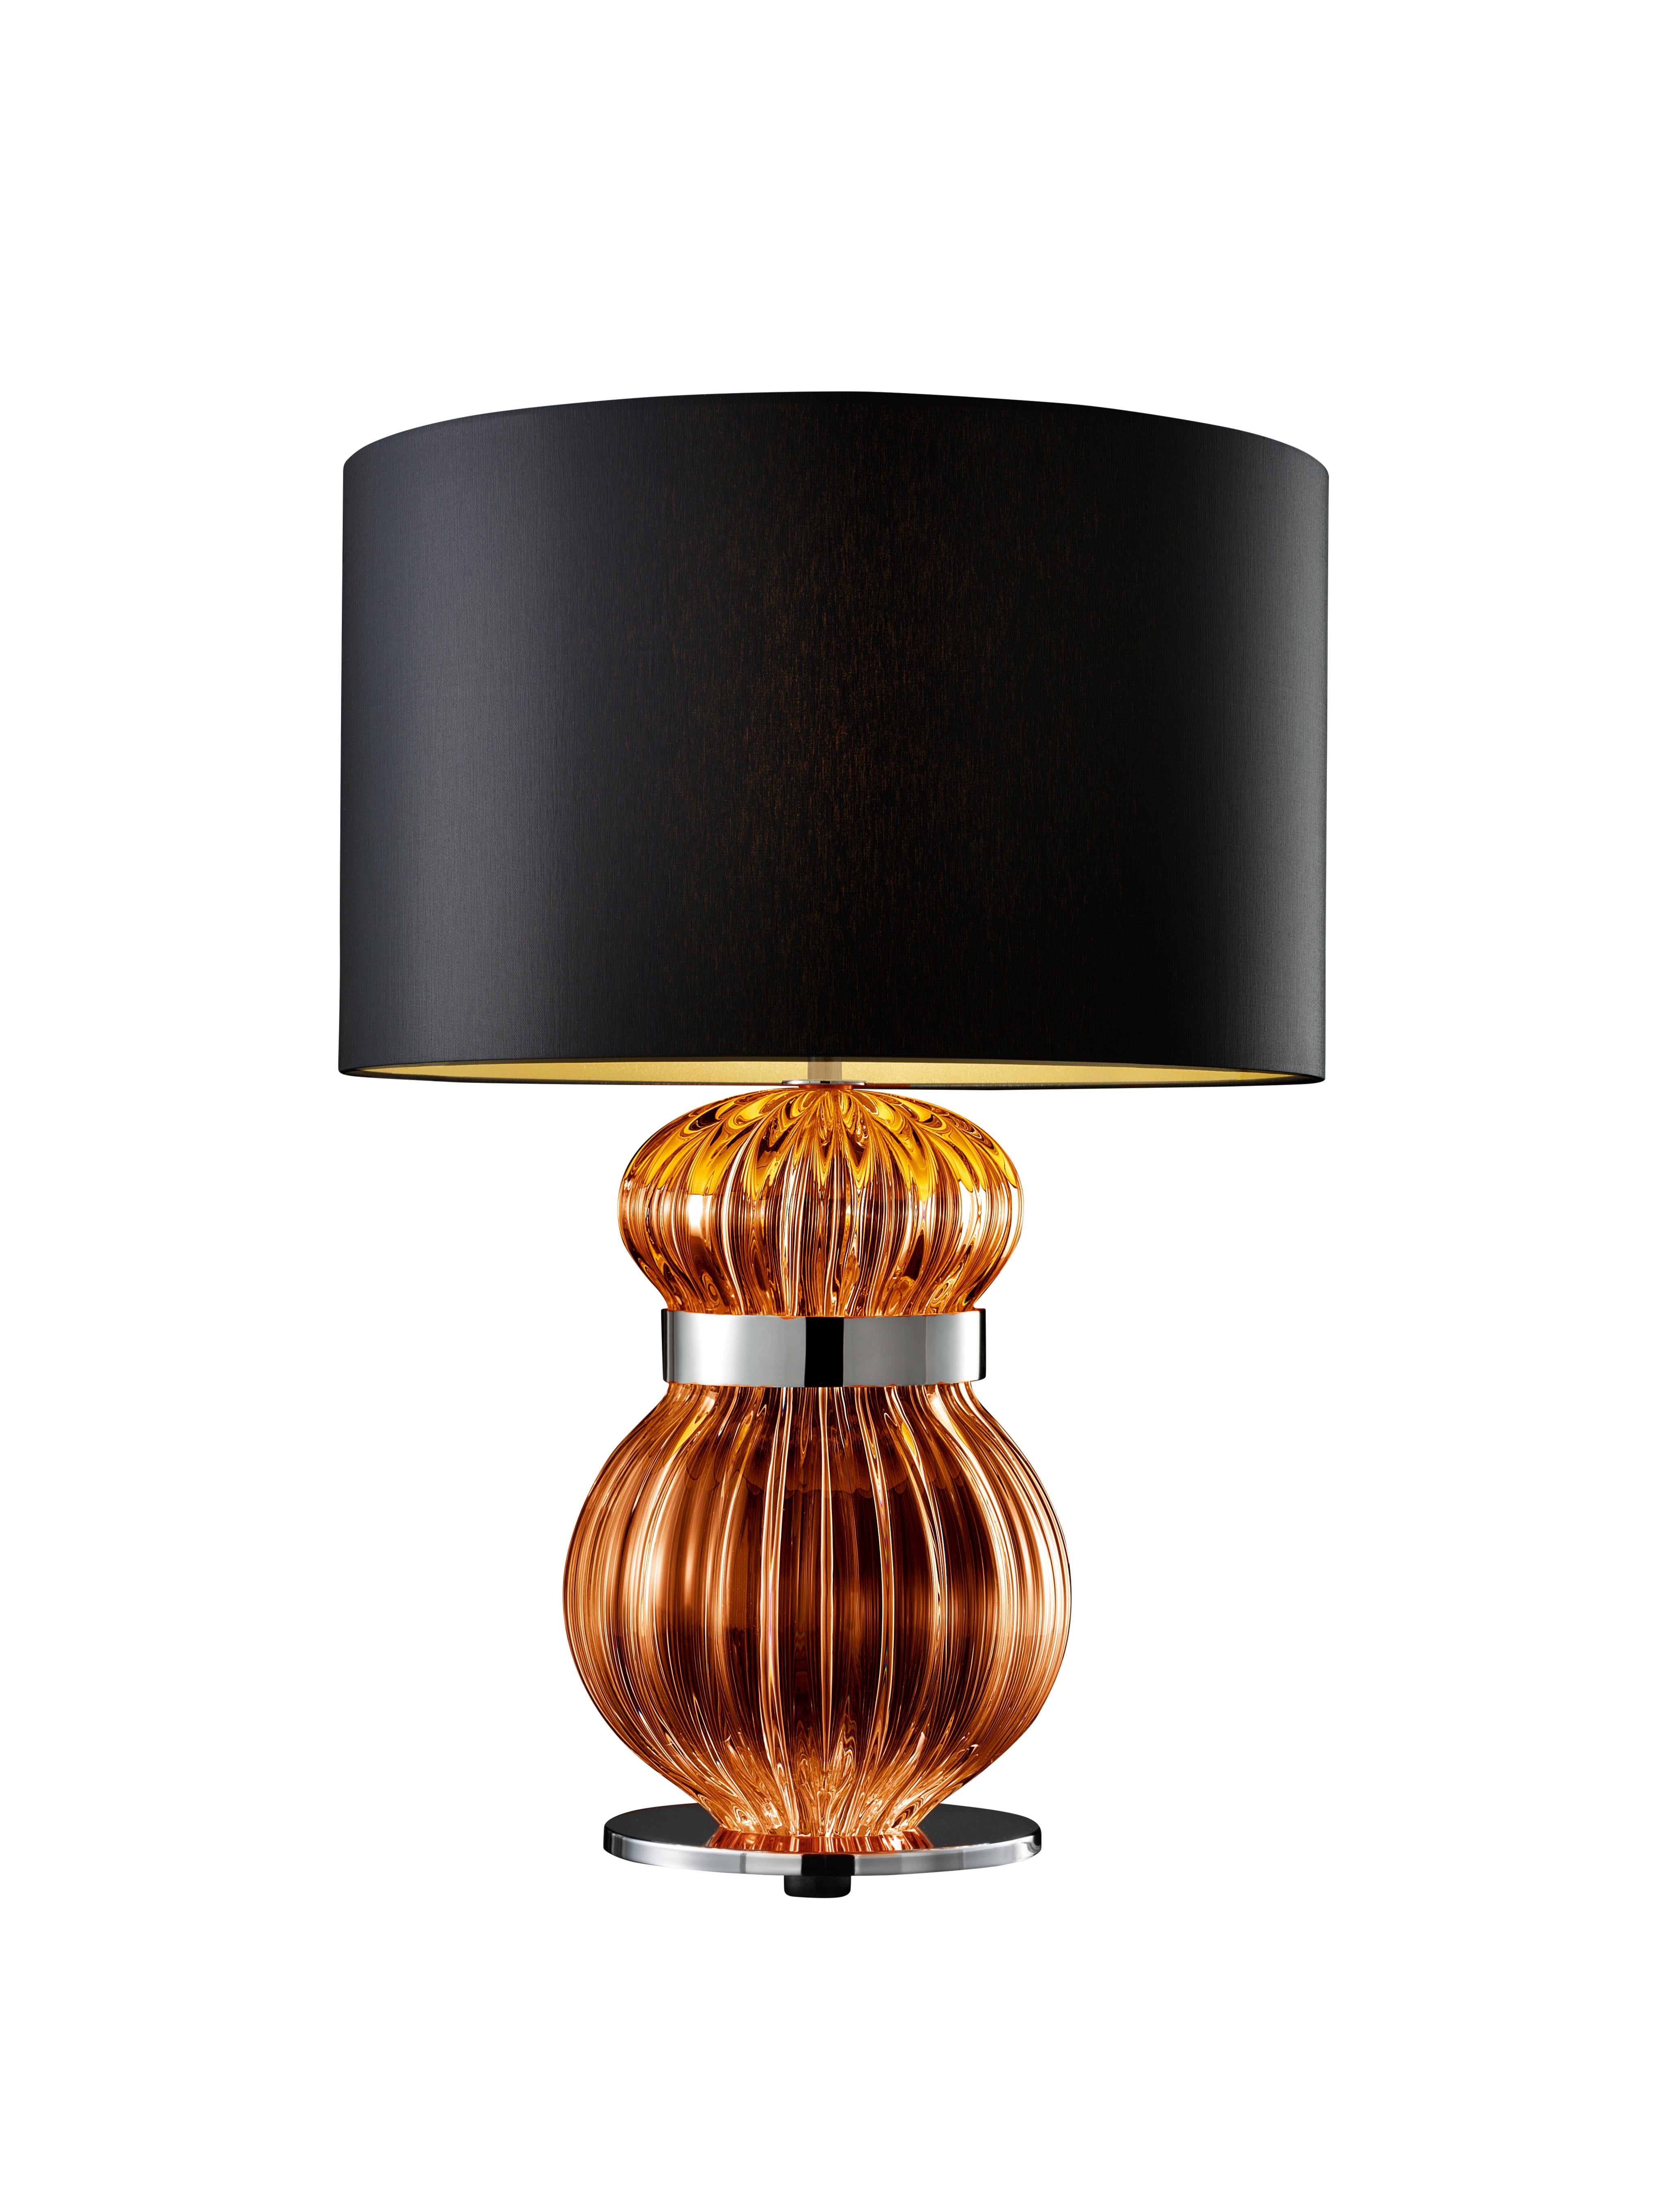 Orange (Caramel_CA) Medina 5686 Table Lamp in Glass with Black/Gold Shade by, Barovier&Toso